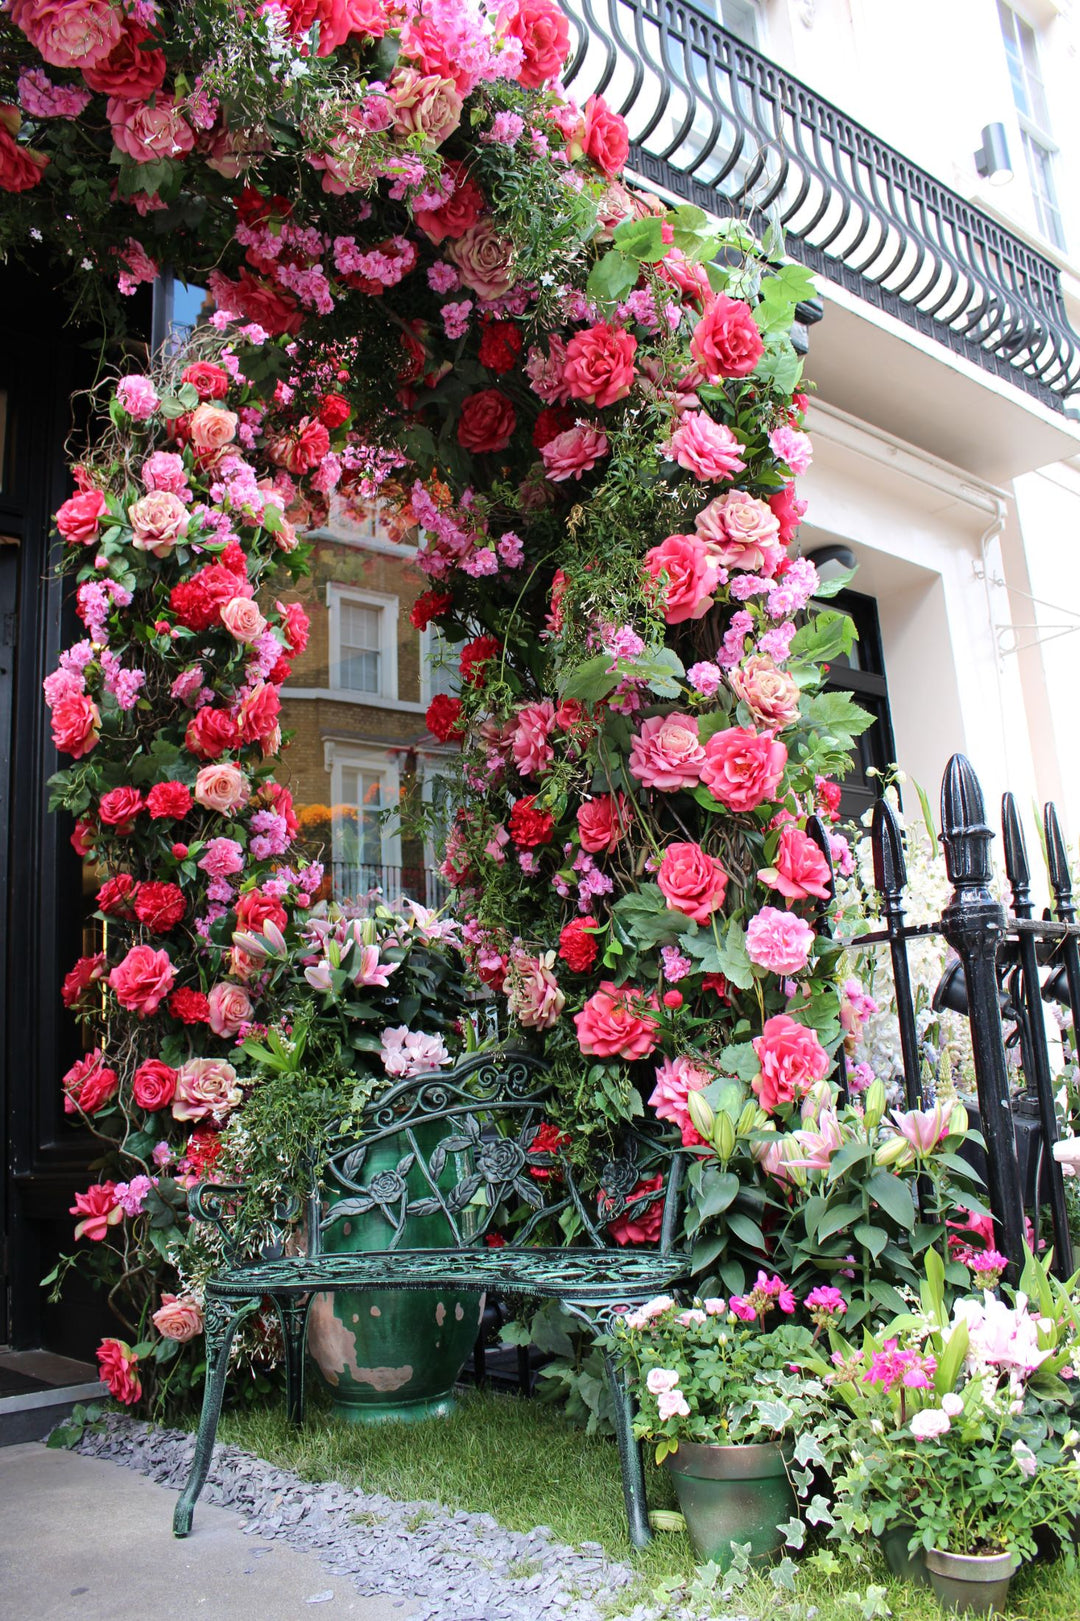 Belgravia Boutique adorned with a floral arch.